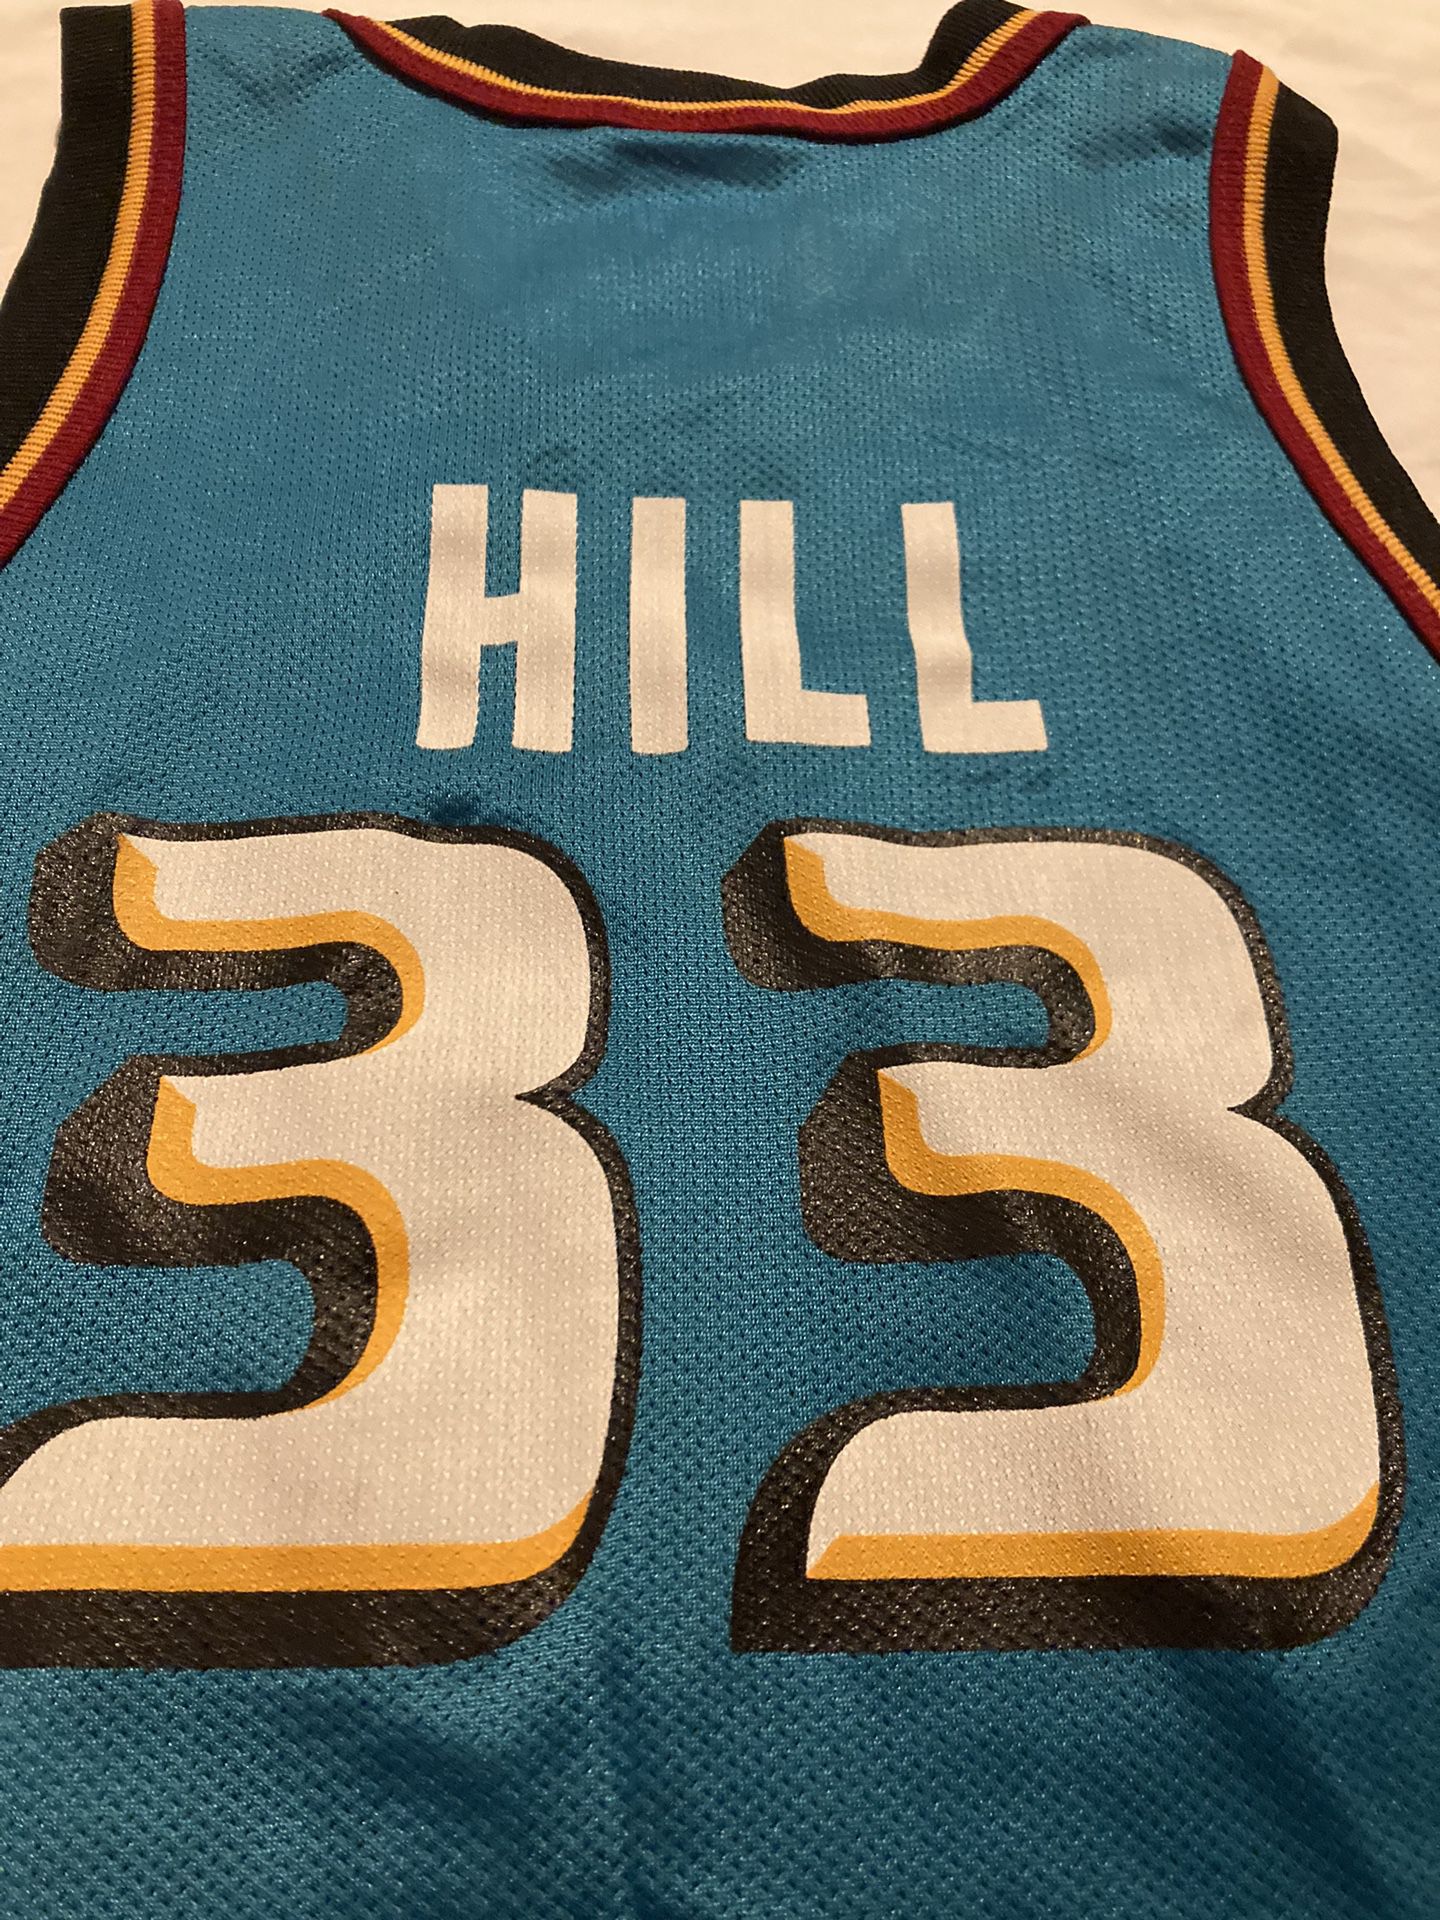 Grant hill magic jersey YOUTH 14-16 for Sale in Eldersburg, MD - OfferUp